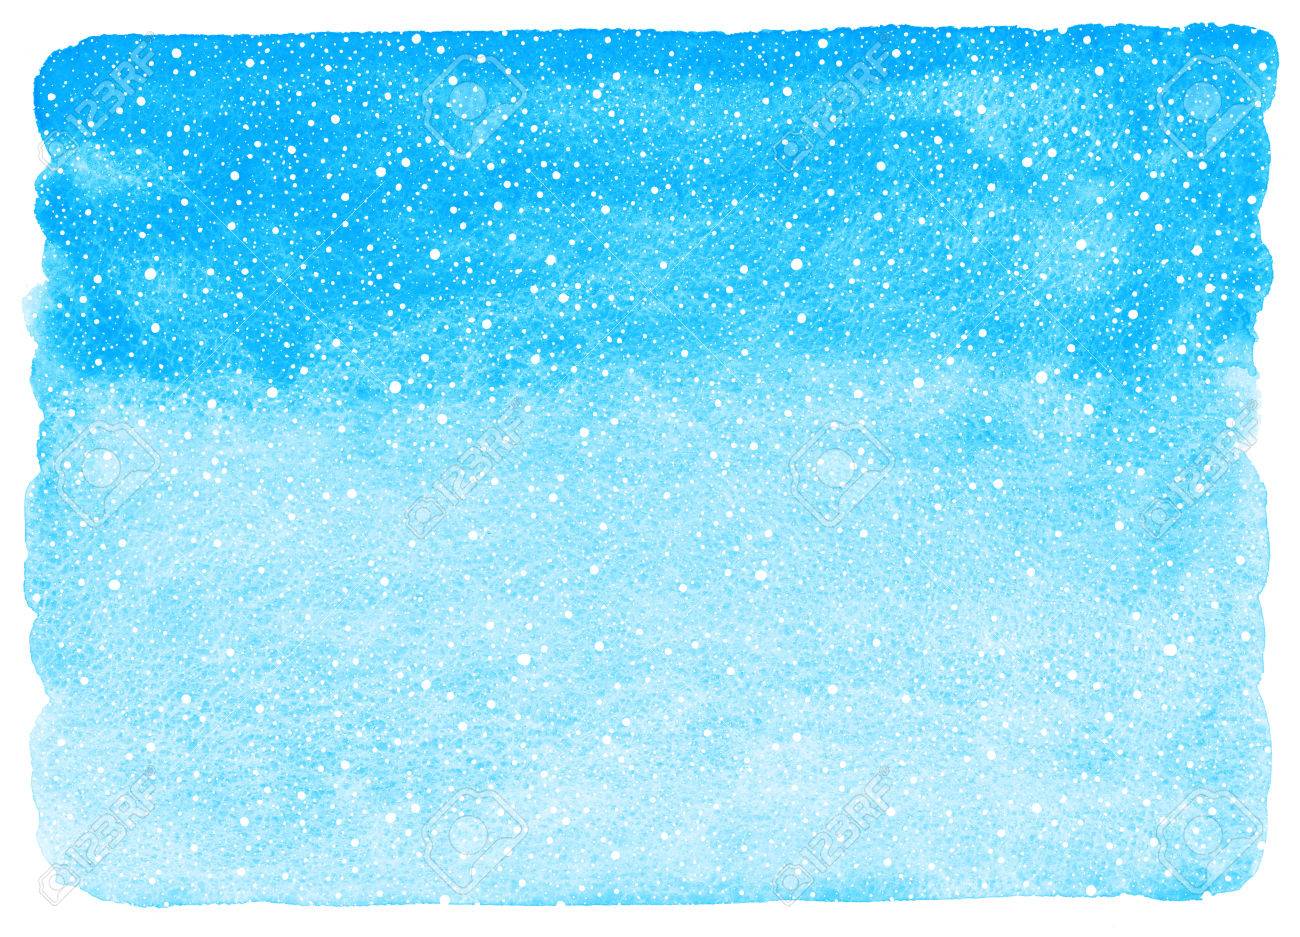 Sky Blue Winter Watercolor Gradient Background With Falling Snow